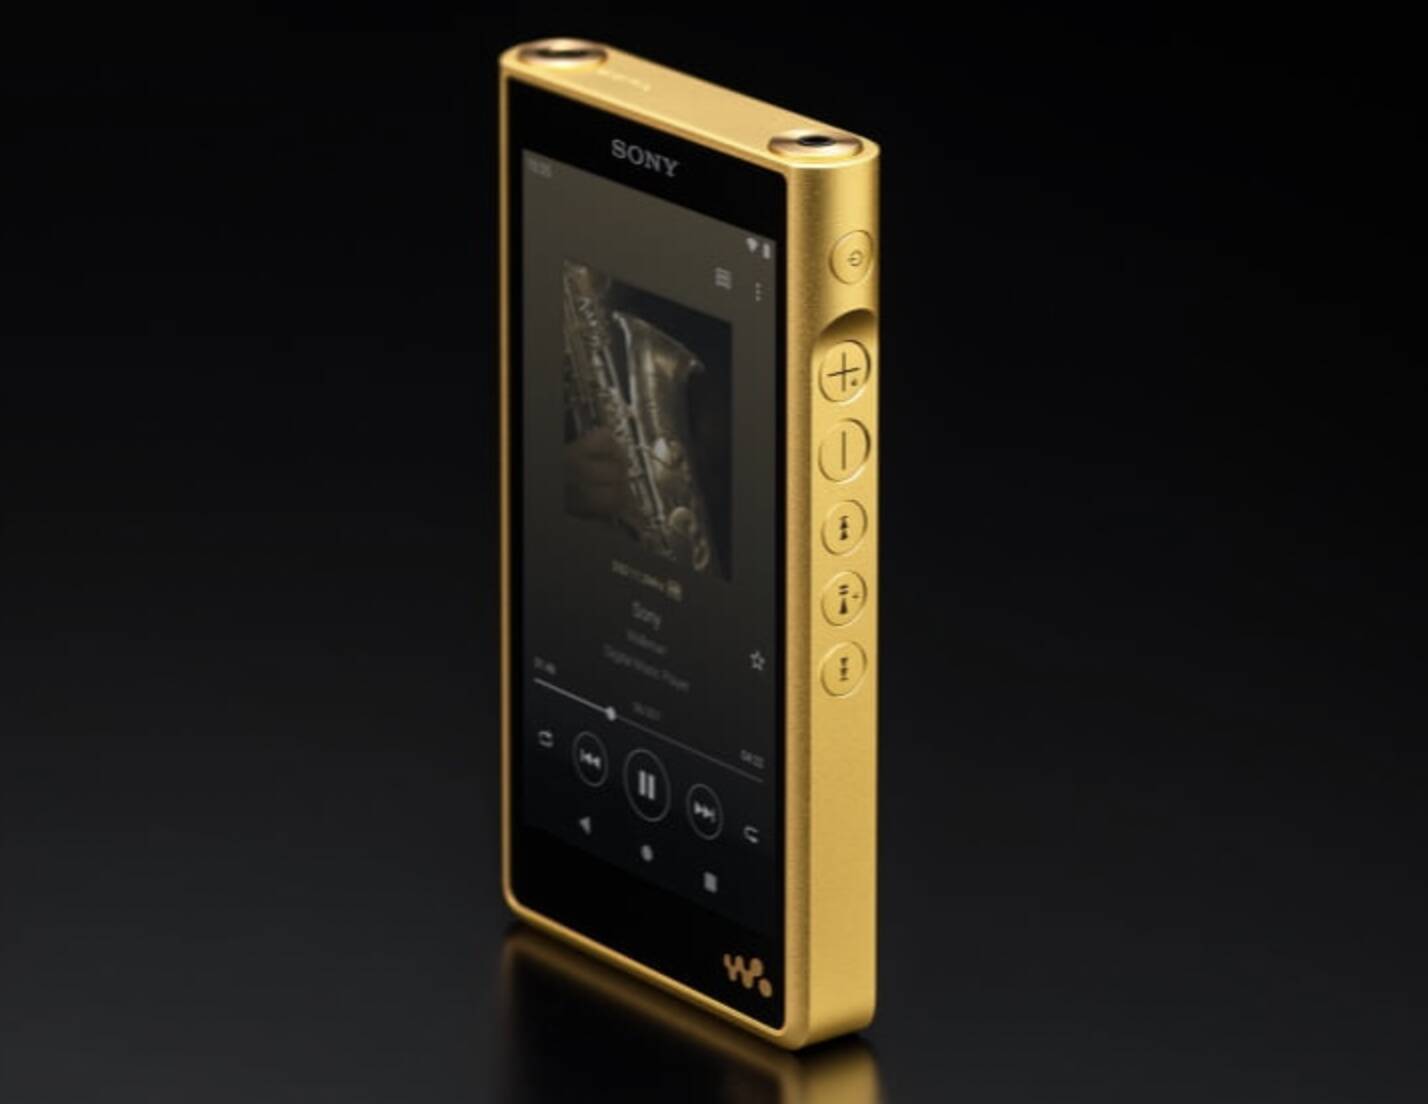 Sony responds to inflation with $3,700 gold-plated 'Walkman' • The Register